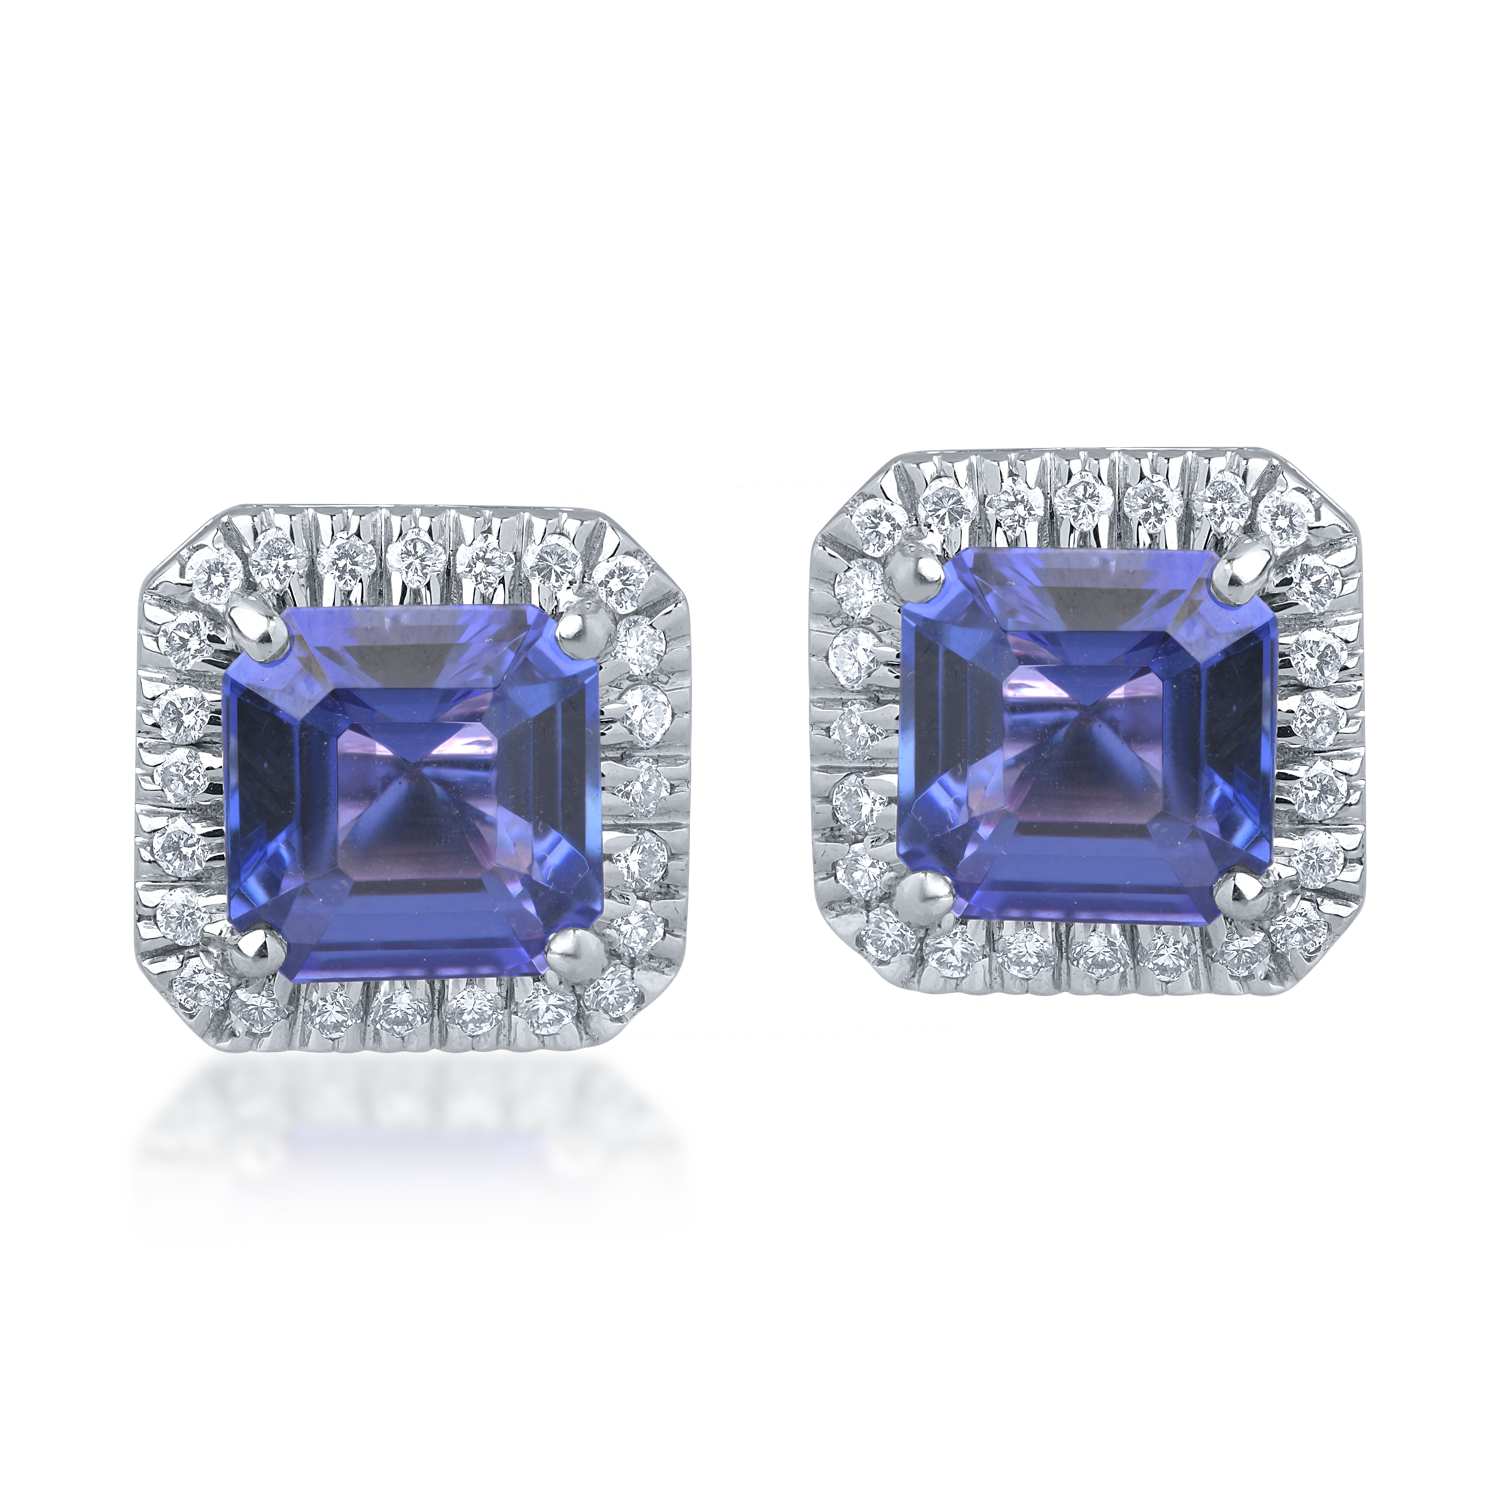 White gold earrings with 6.74ct tanzanites and 0.635ct diamonds